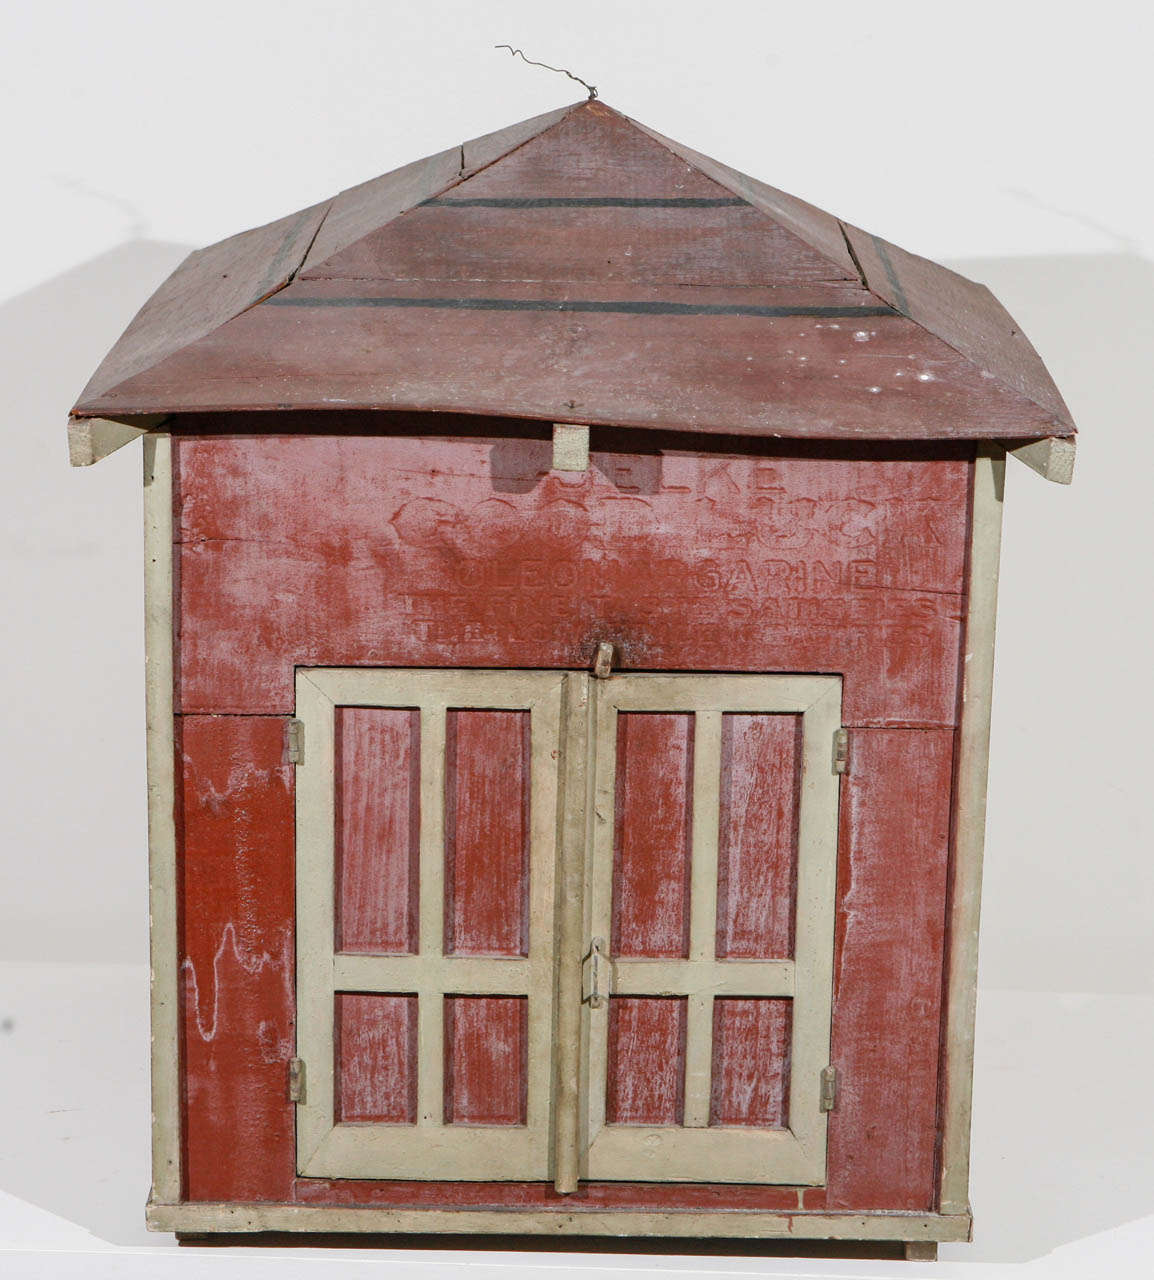 Wooden Folk Art model Farm House (made of scrap woods, glass, nails and miniature hinges), with original, barn red paint with gray trim.  The small structure has very rare, double hung glass windows which raise to open, along with a single door and